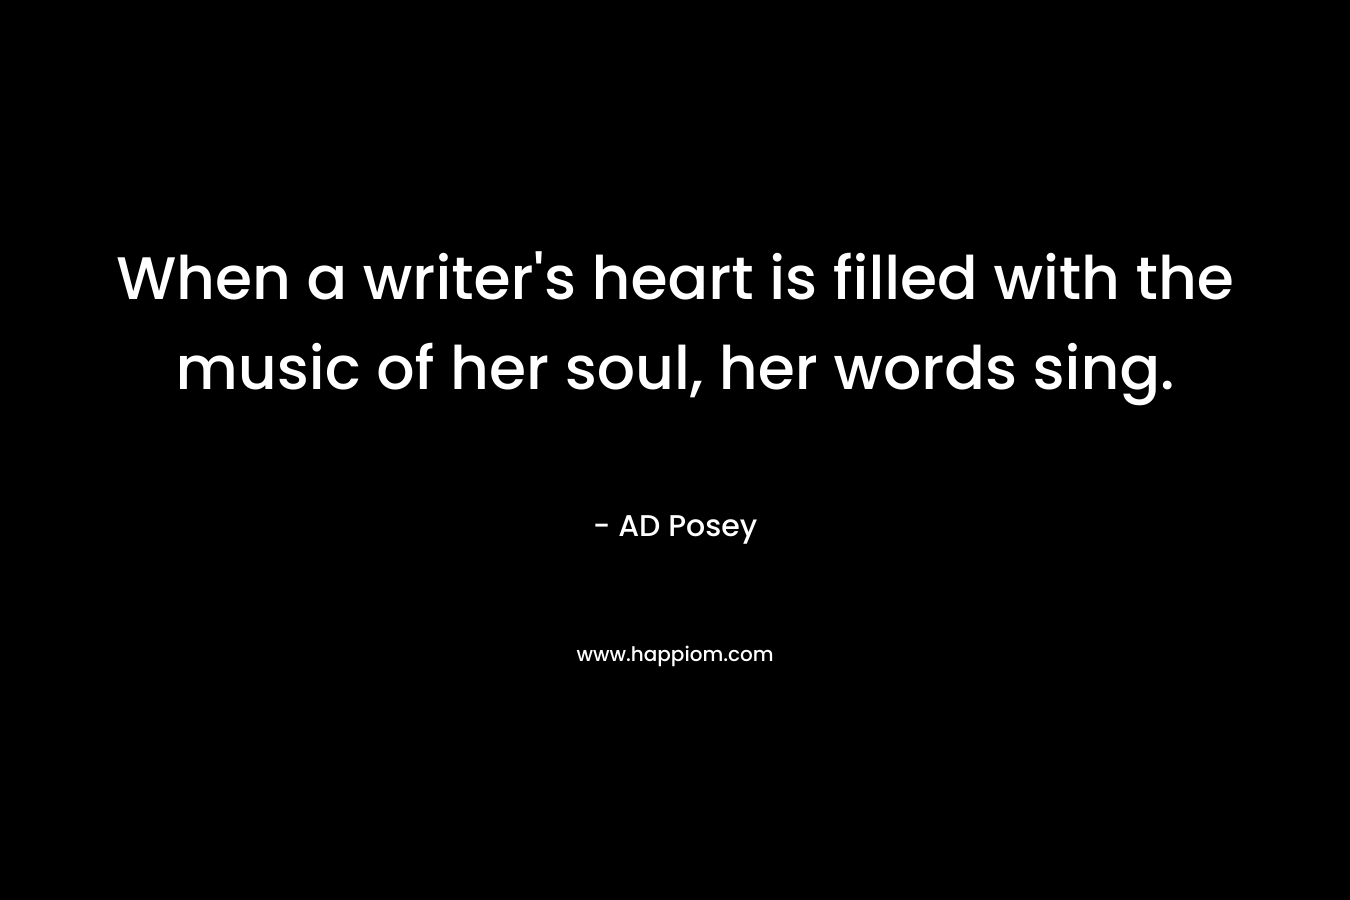 When a writer's heart is filled with the music of her soul, her words sing.